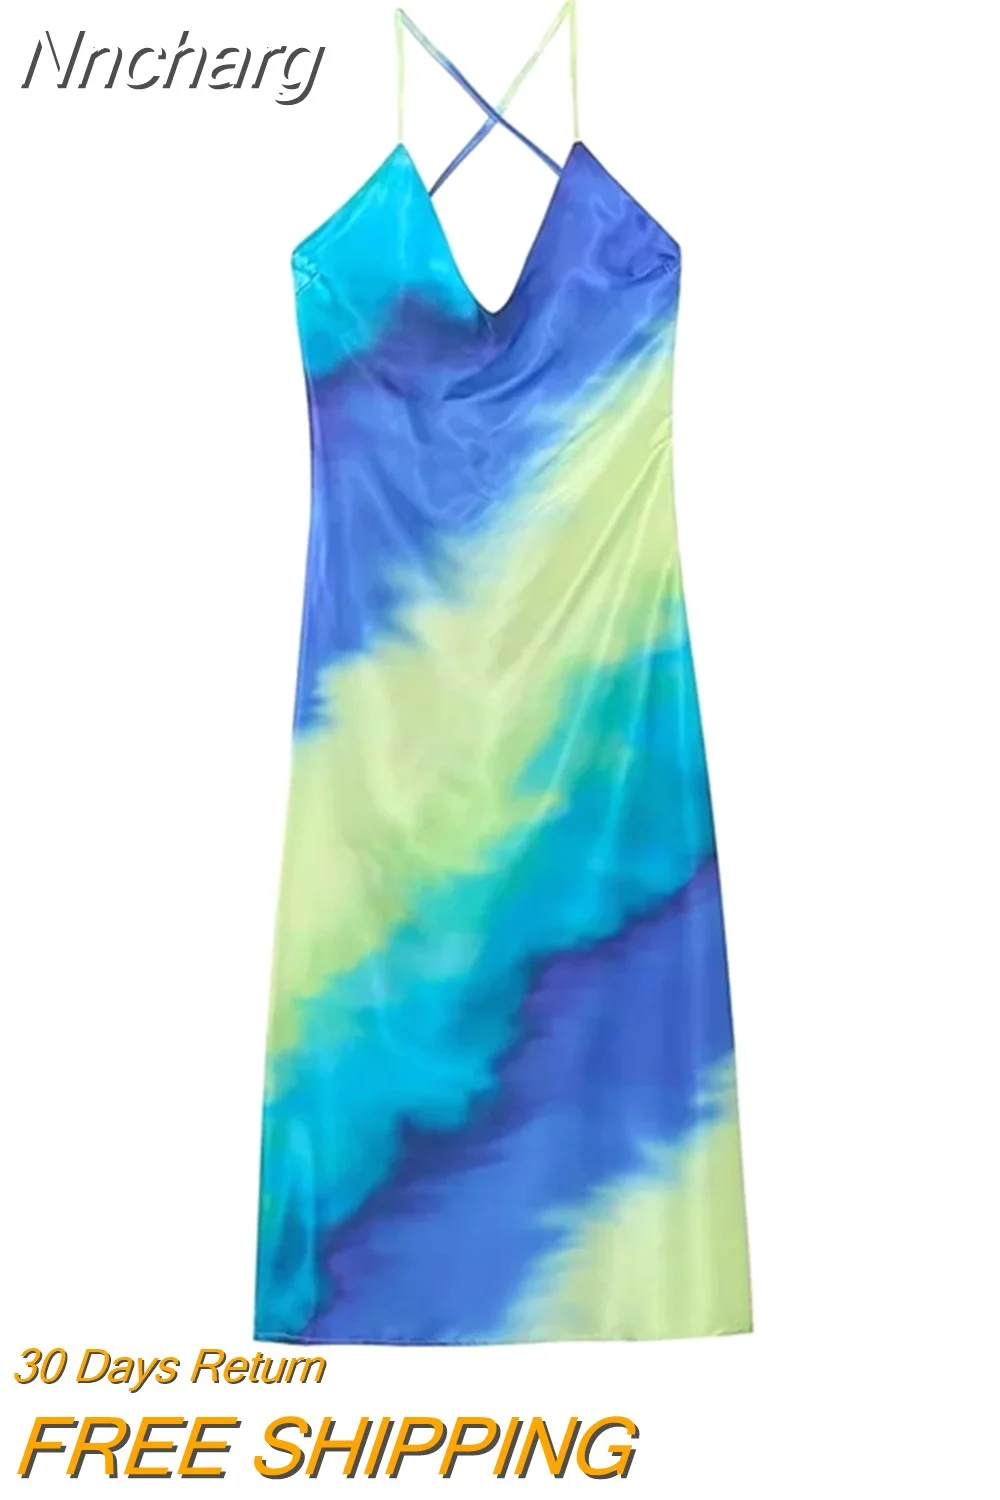 Nncharge TRAF Women Tie Dye Lingerie Dresses Chic Sleeveless Backless Sling Dress Women's Club Party Dresses